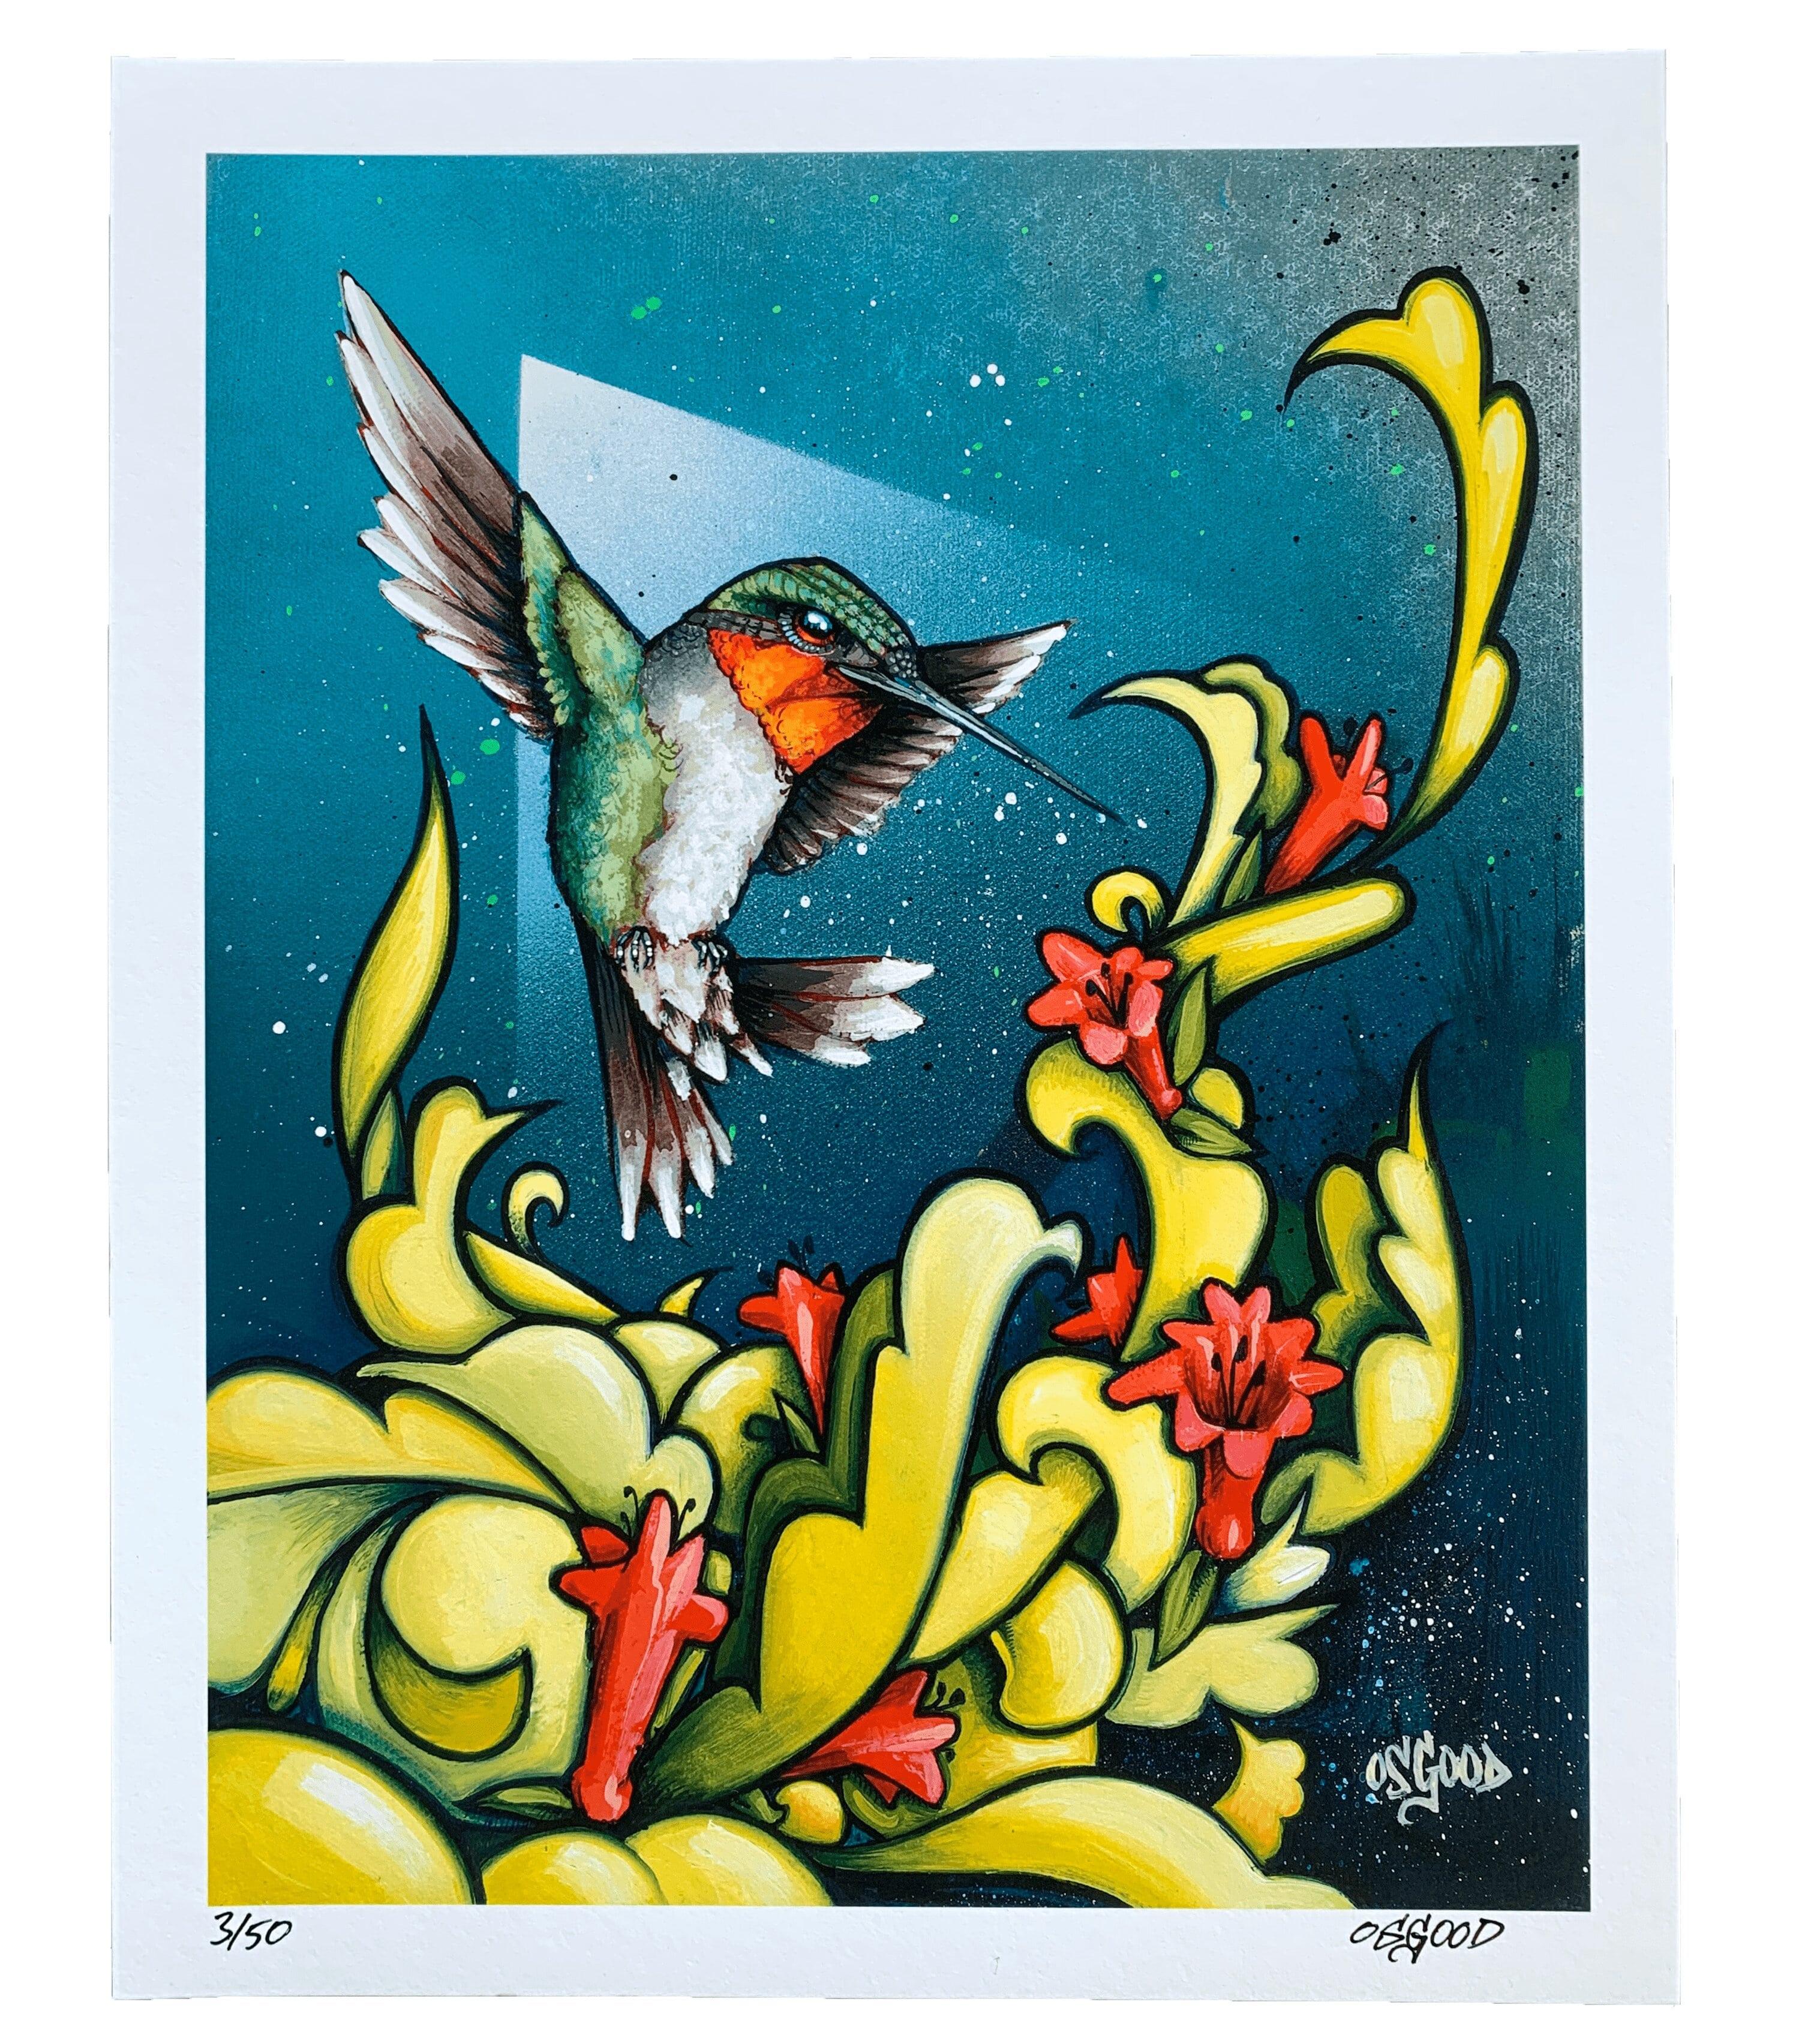 'Velocity & Vibrancy Fine Art Print' is a hummingbird fine art print by contemporary urban artist John Osgoodl. It measures 10 x 8 inches. This piece is part of a limited edition collection, with only 50 copies available. Each copy is individually